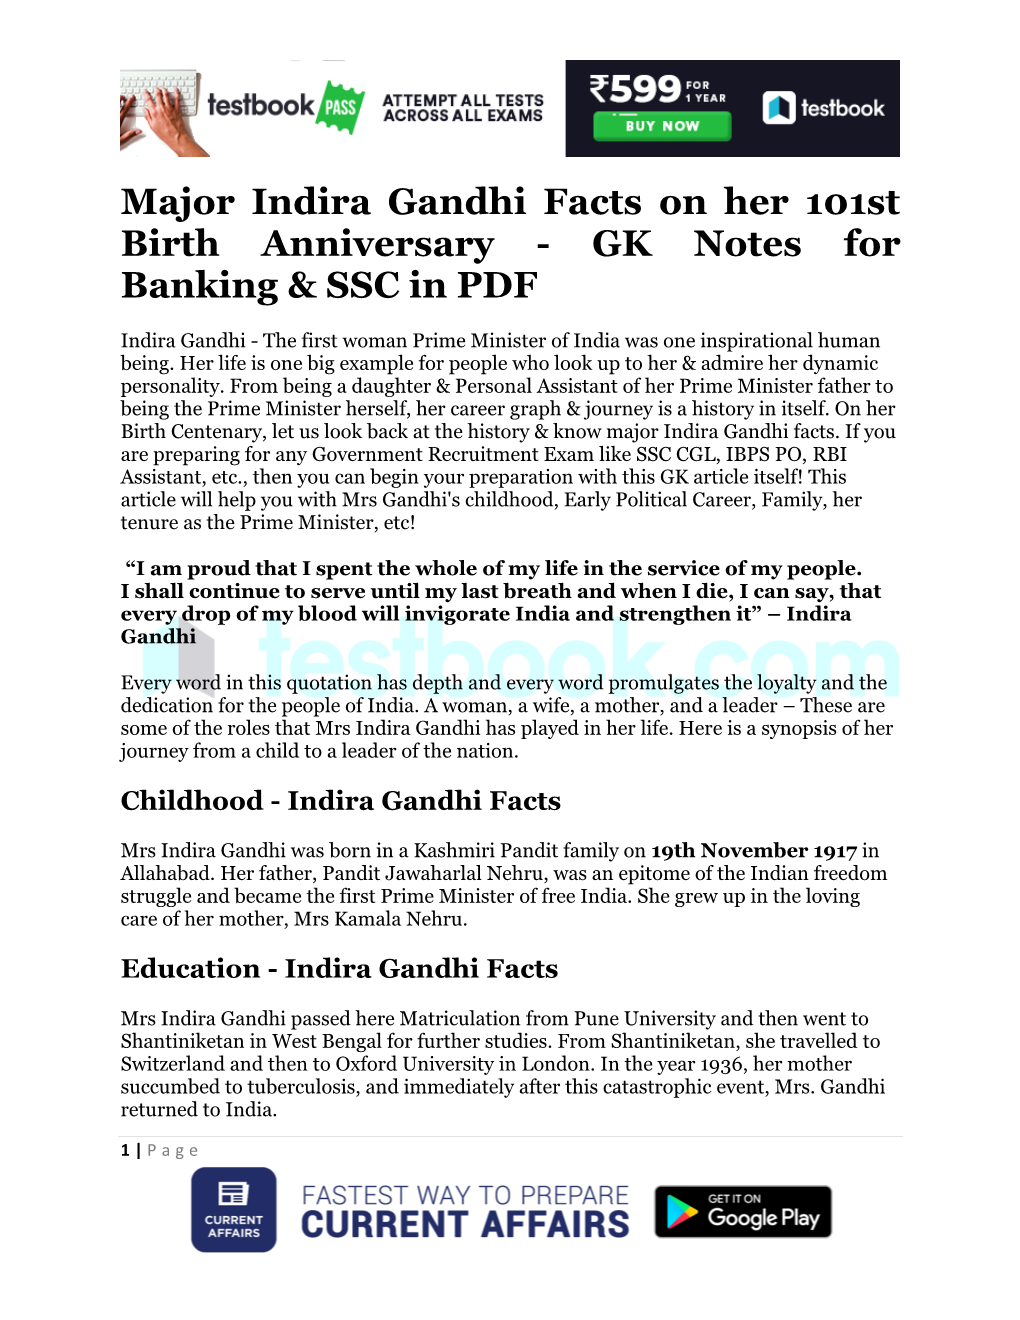 Major Indira Gandhi Facts on Her 101St Birth Anniversary - GK Notes for Banking & SSC in PDF